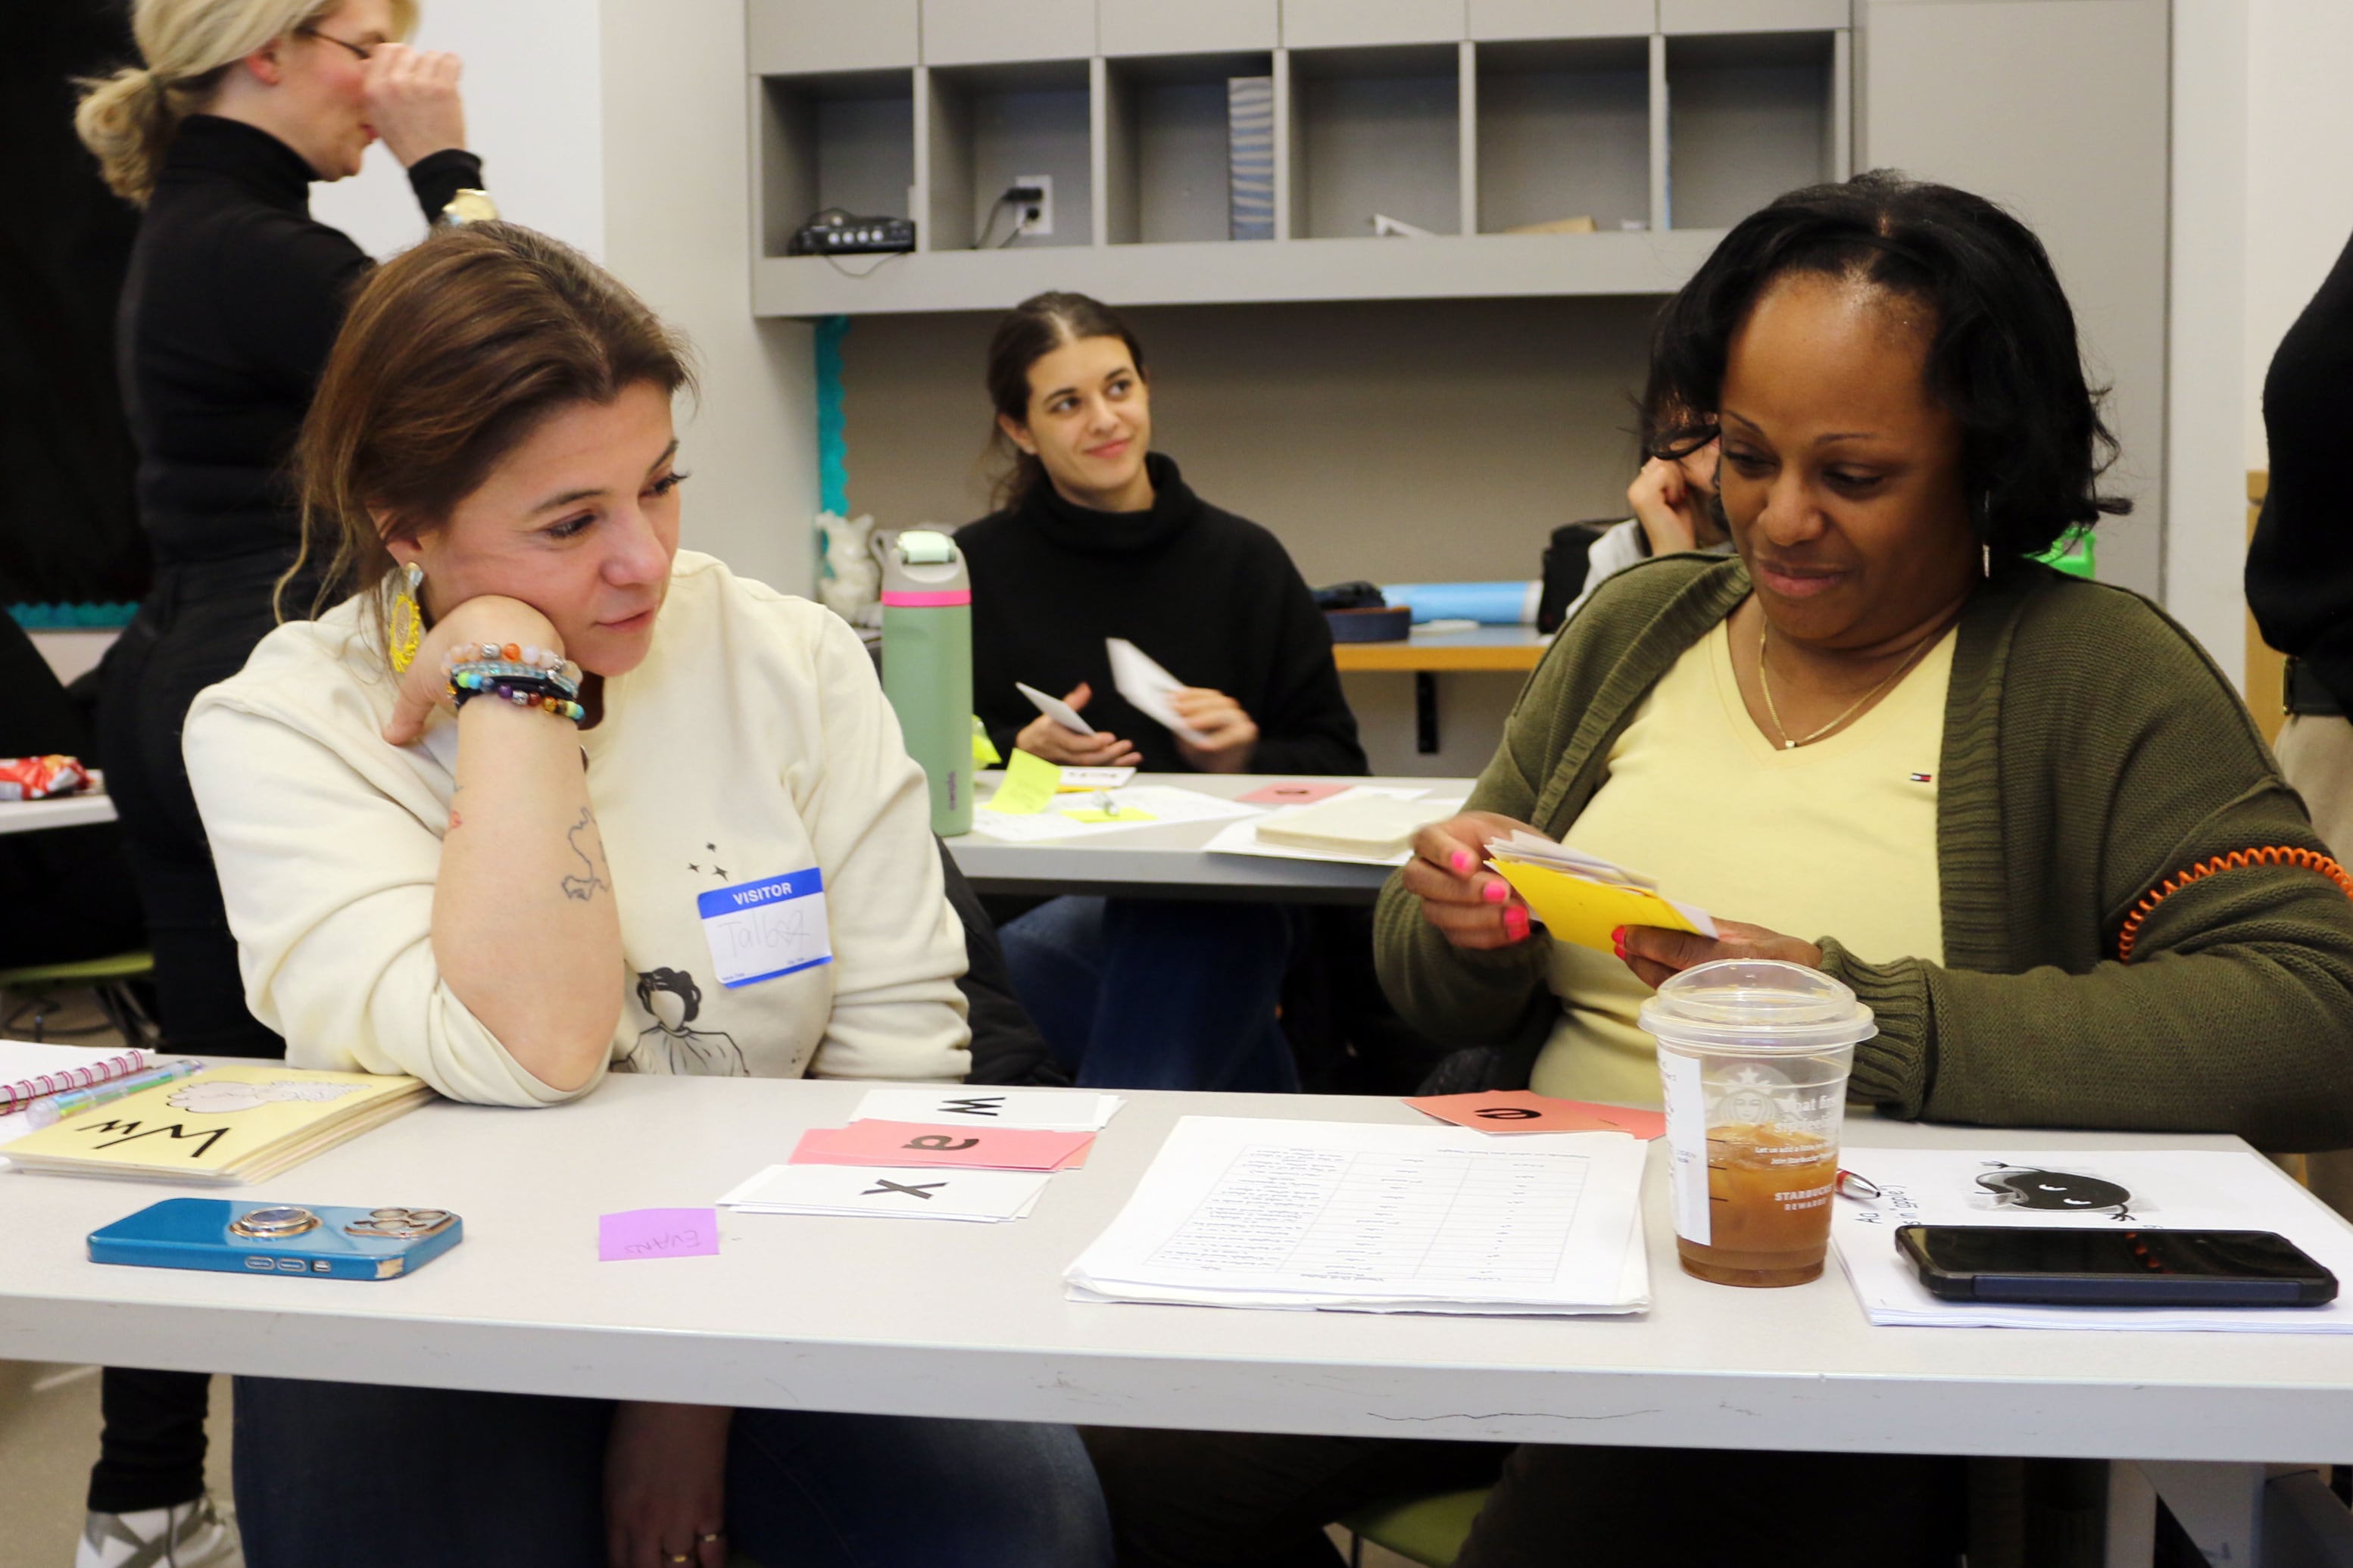 Two women sit at a table inside of a classroom practicing phonics training together with other people in the background.